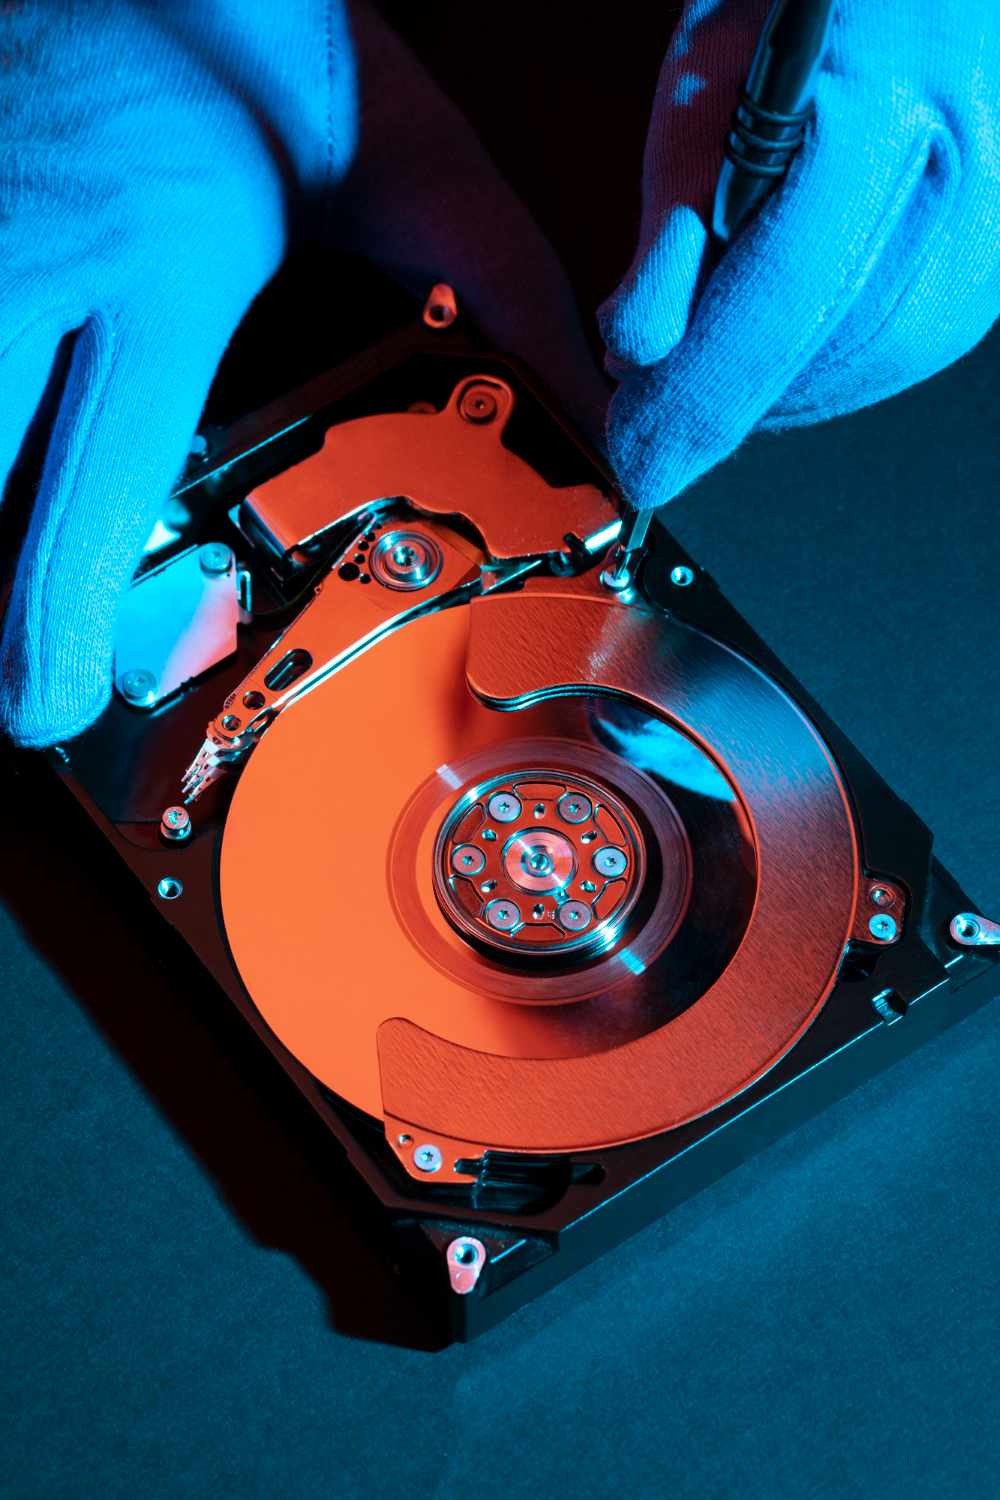 how to recover data from a corrupted drive